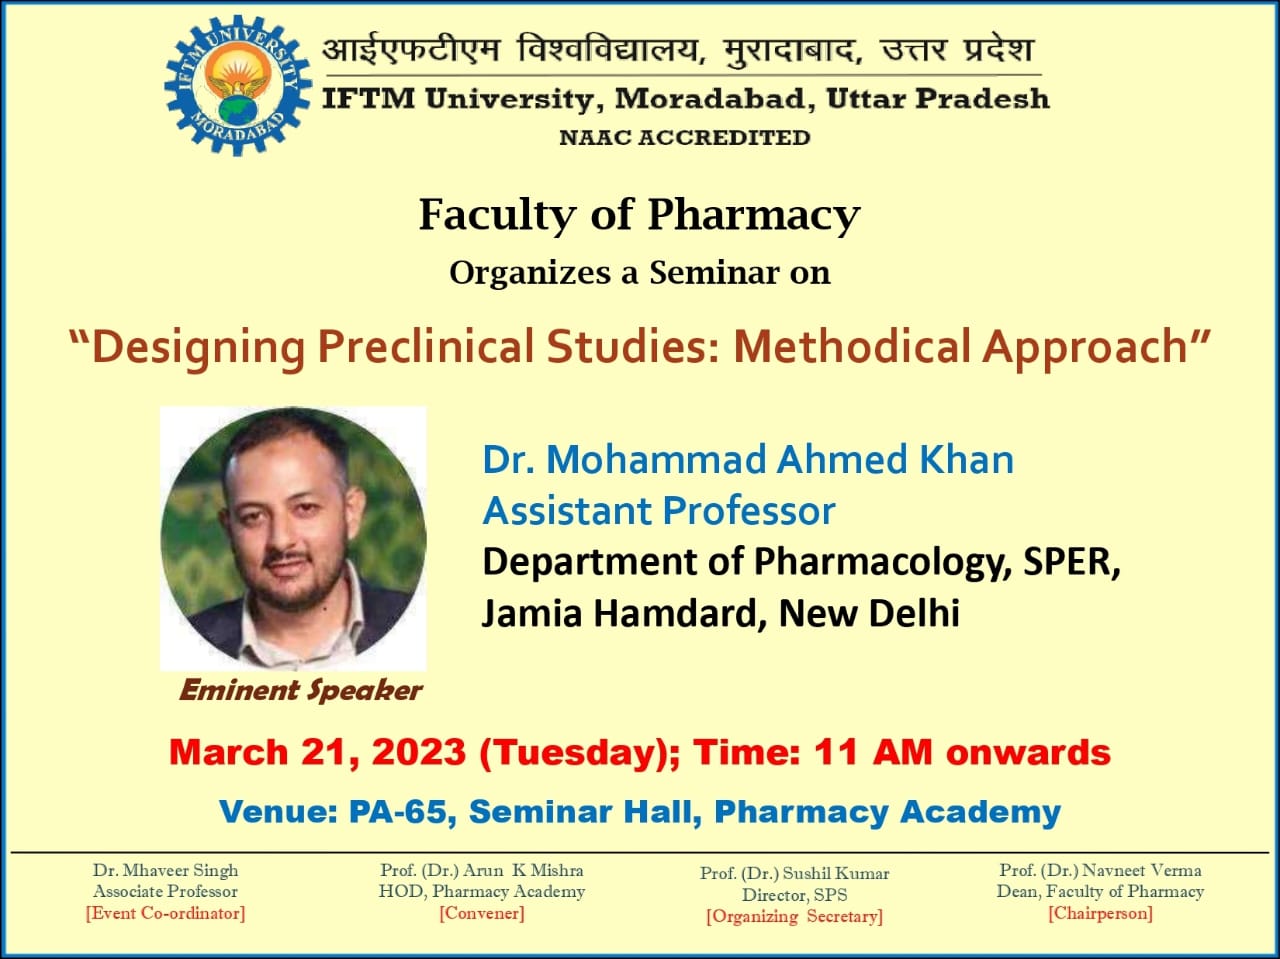 Seminar on Designing Preclinical Studies: Methodical Approach